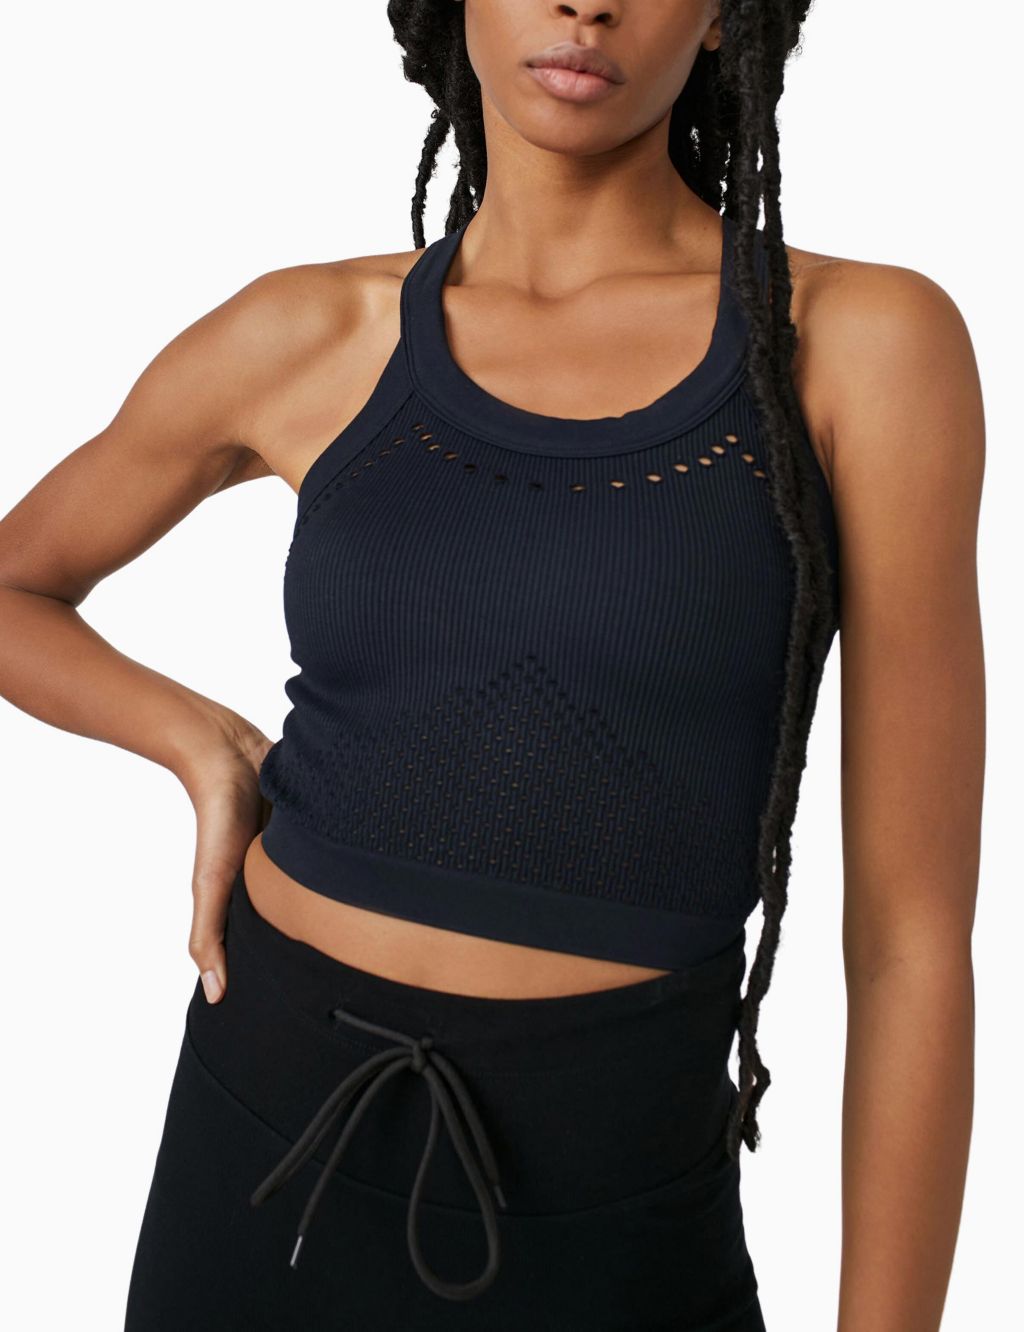 Serendipity Rib Knitted Twist Back Crop Top image 1